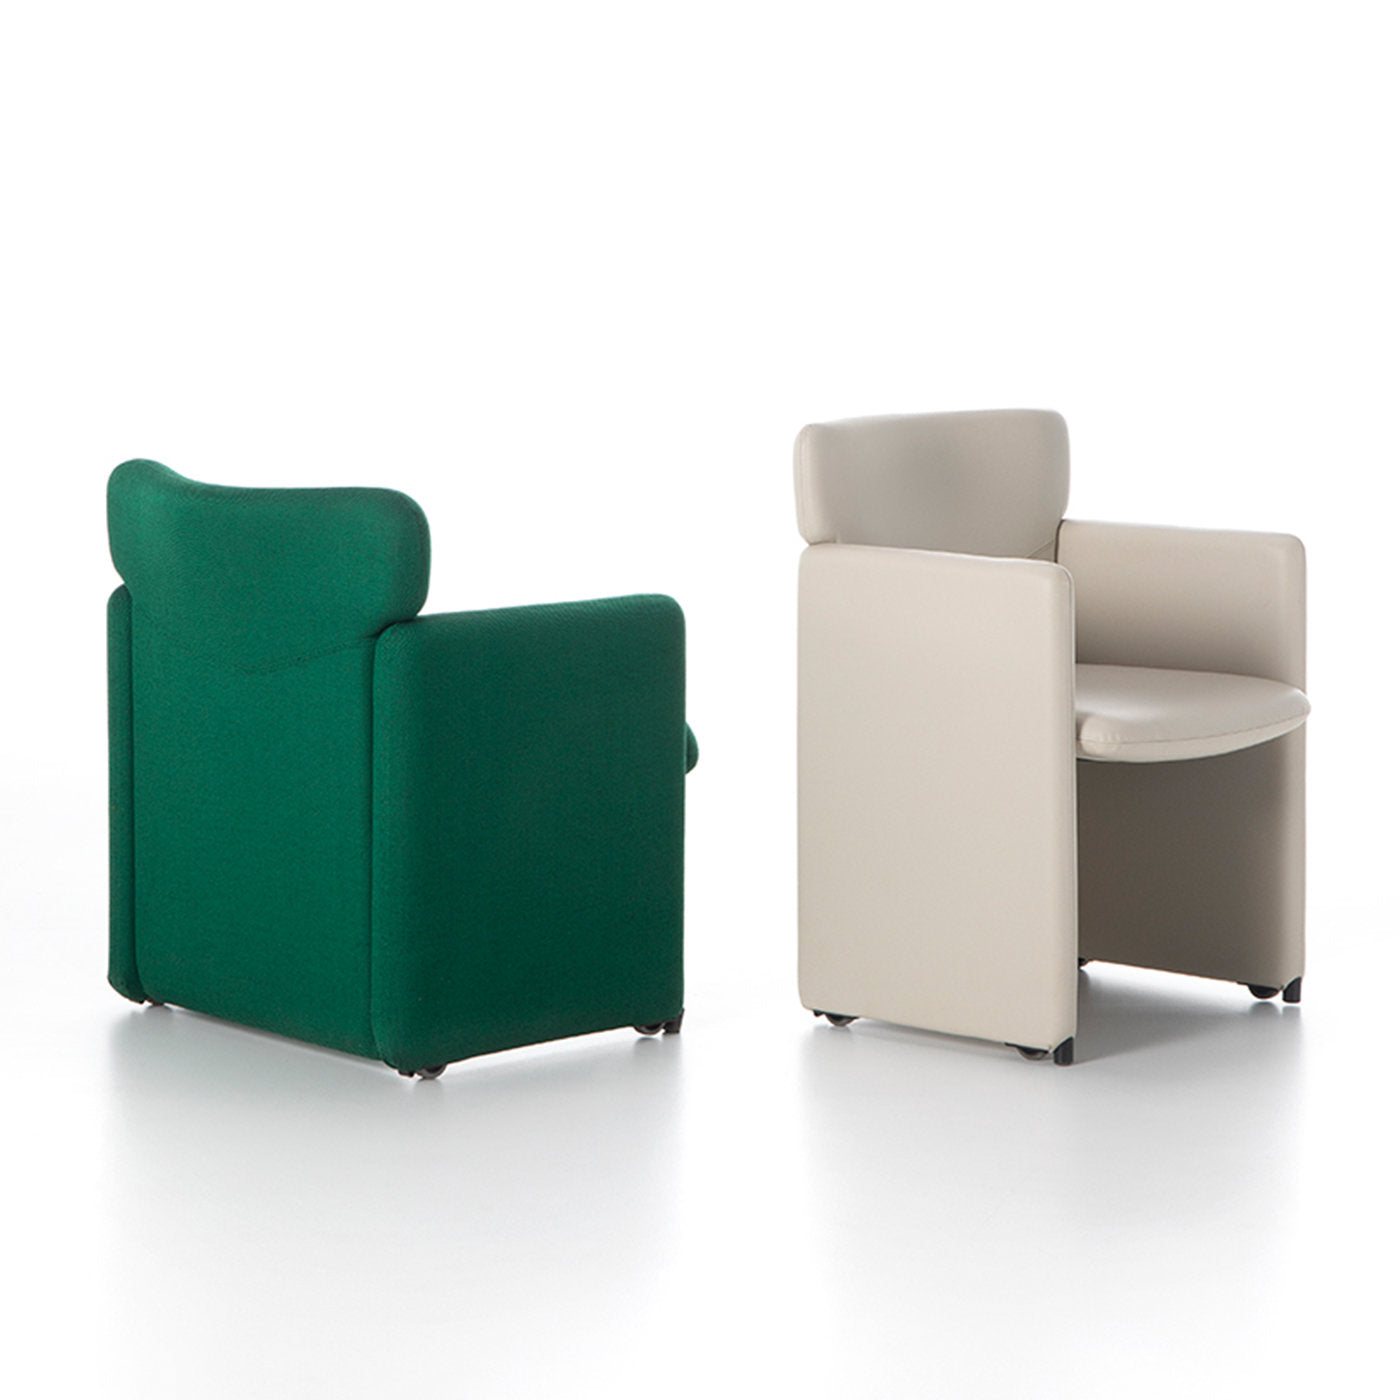 PS148 Forest Green Armchair by Centro Progetti Tecno - Alternative view 1